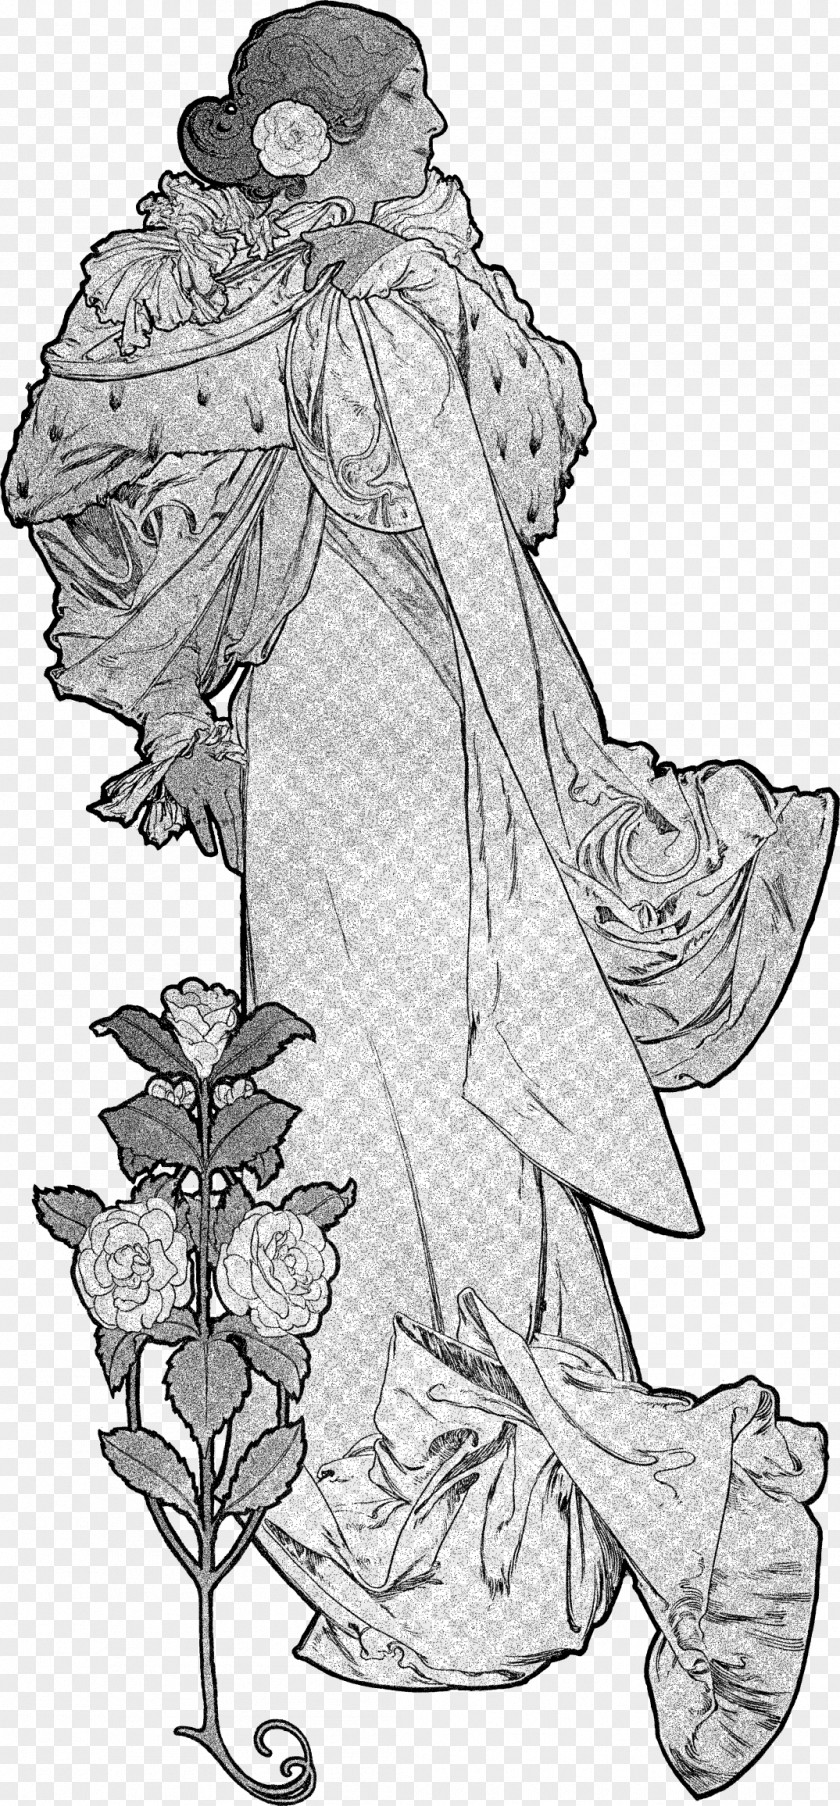 Halftones The Lady Of Camellias Line Art Sketch PNG